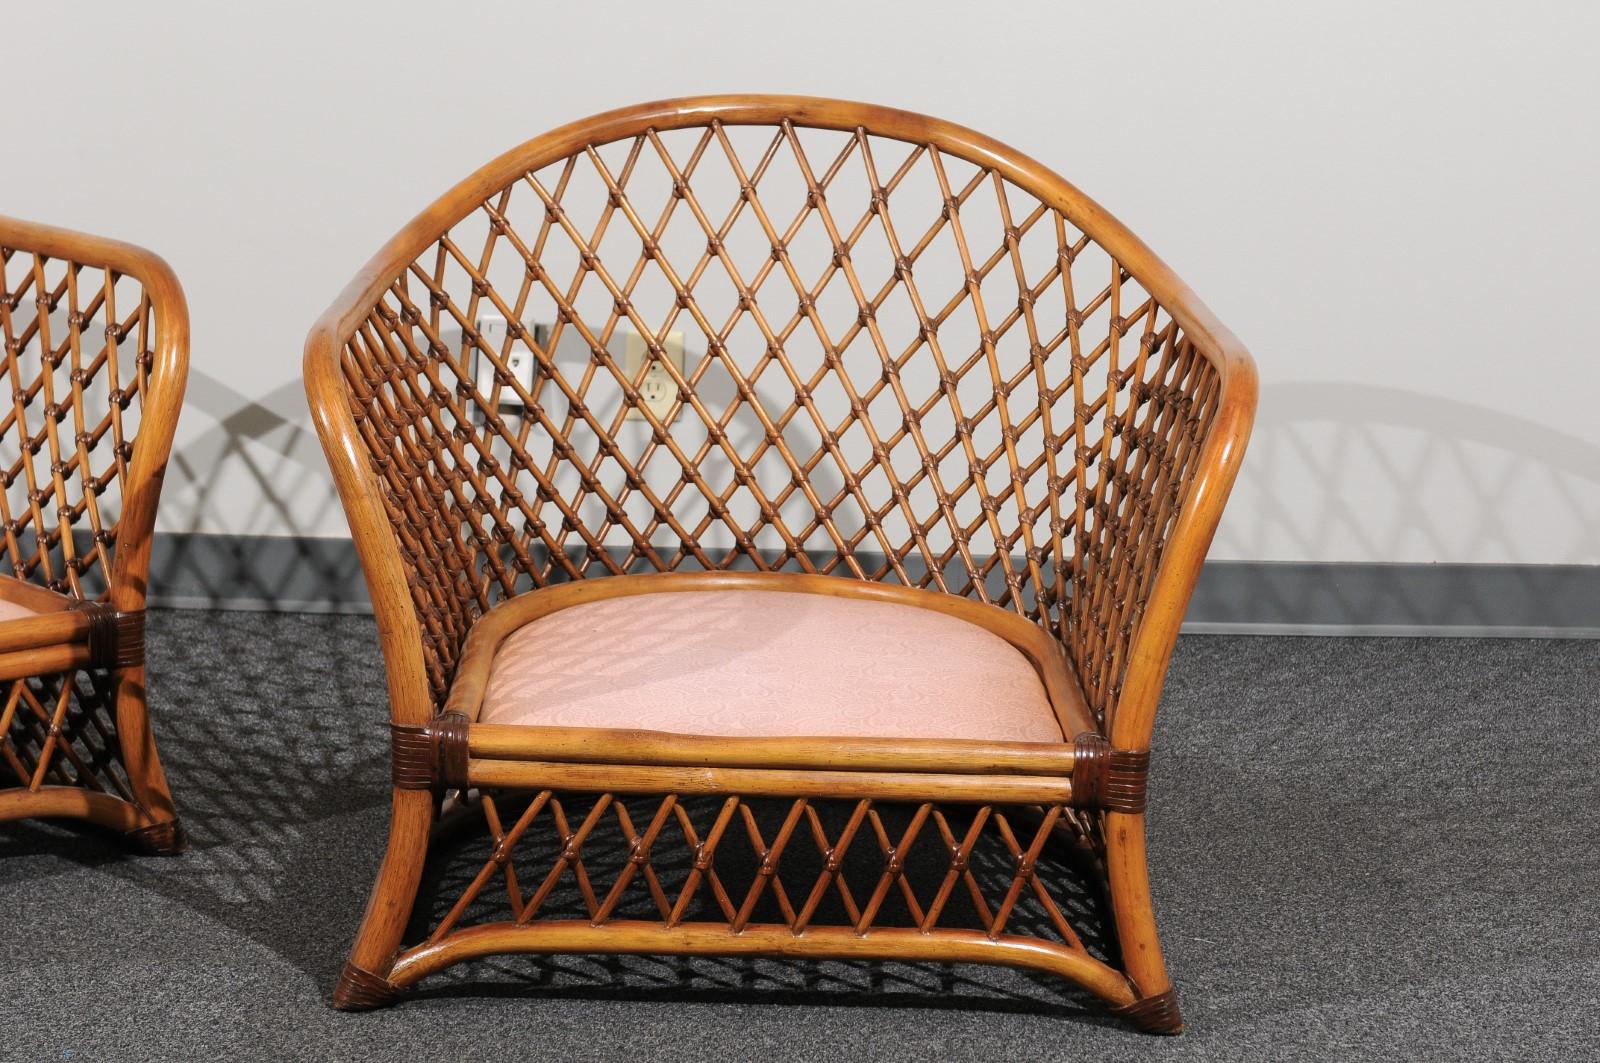 American Sculptural Restored Pair of Large-Scale Lattice Club Chairs, circa 1990